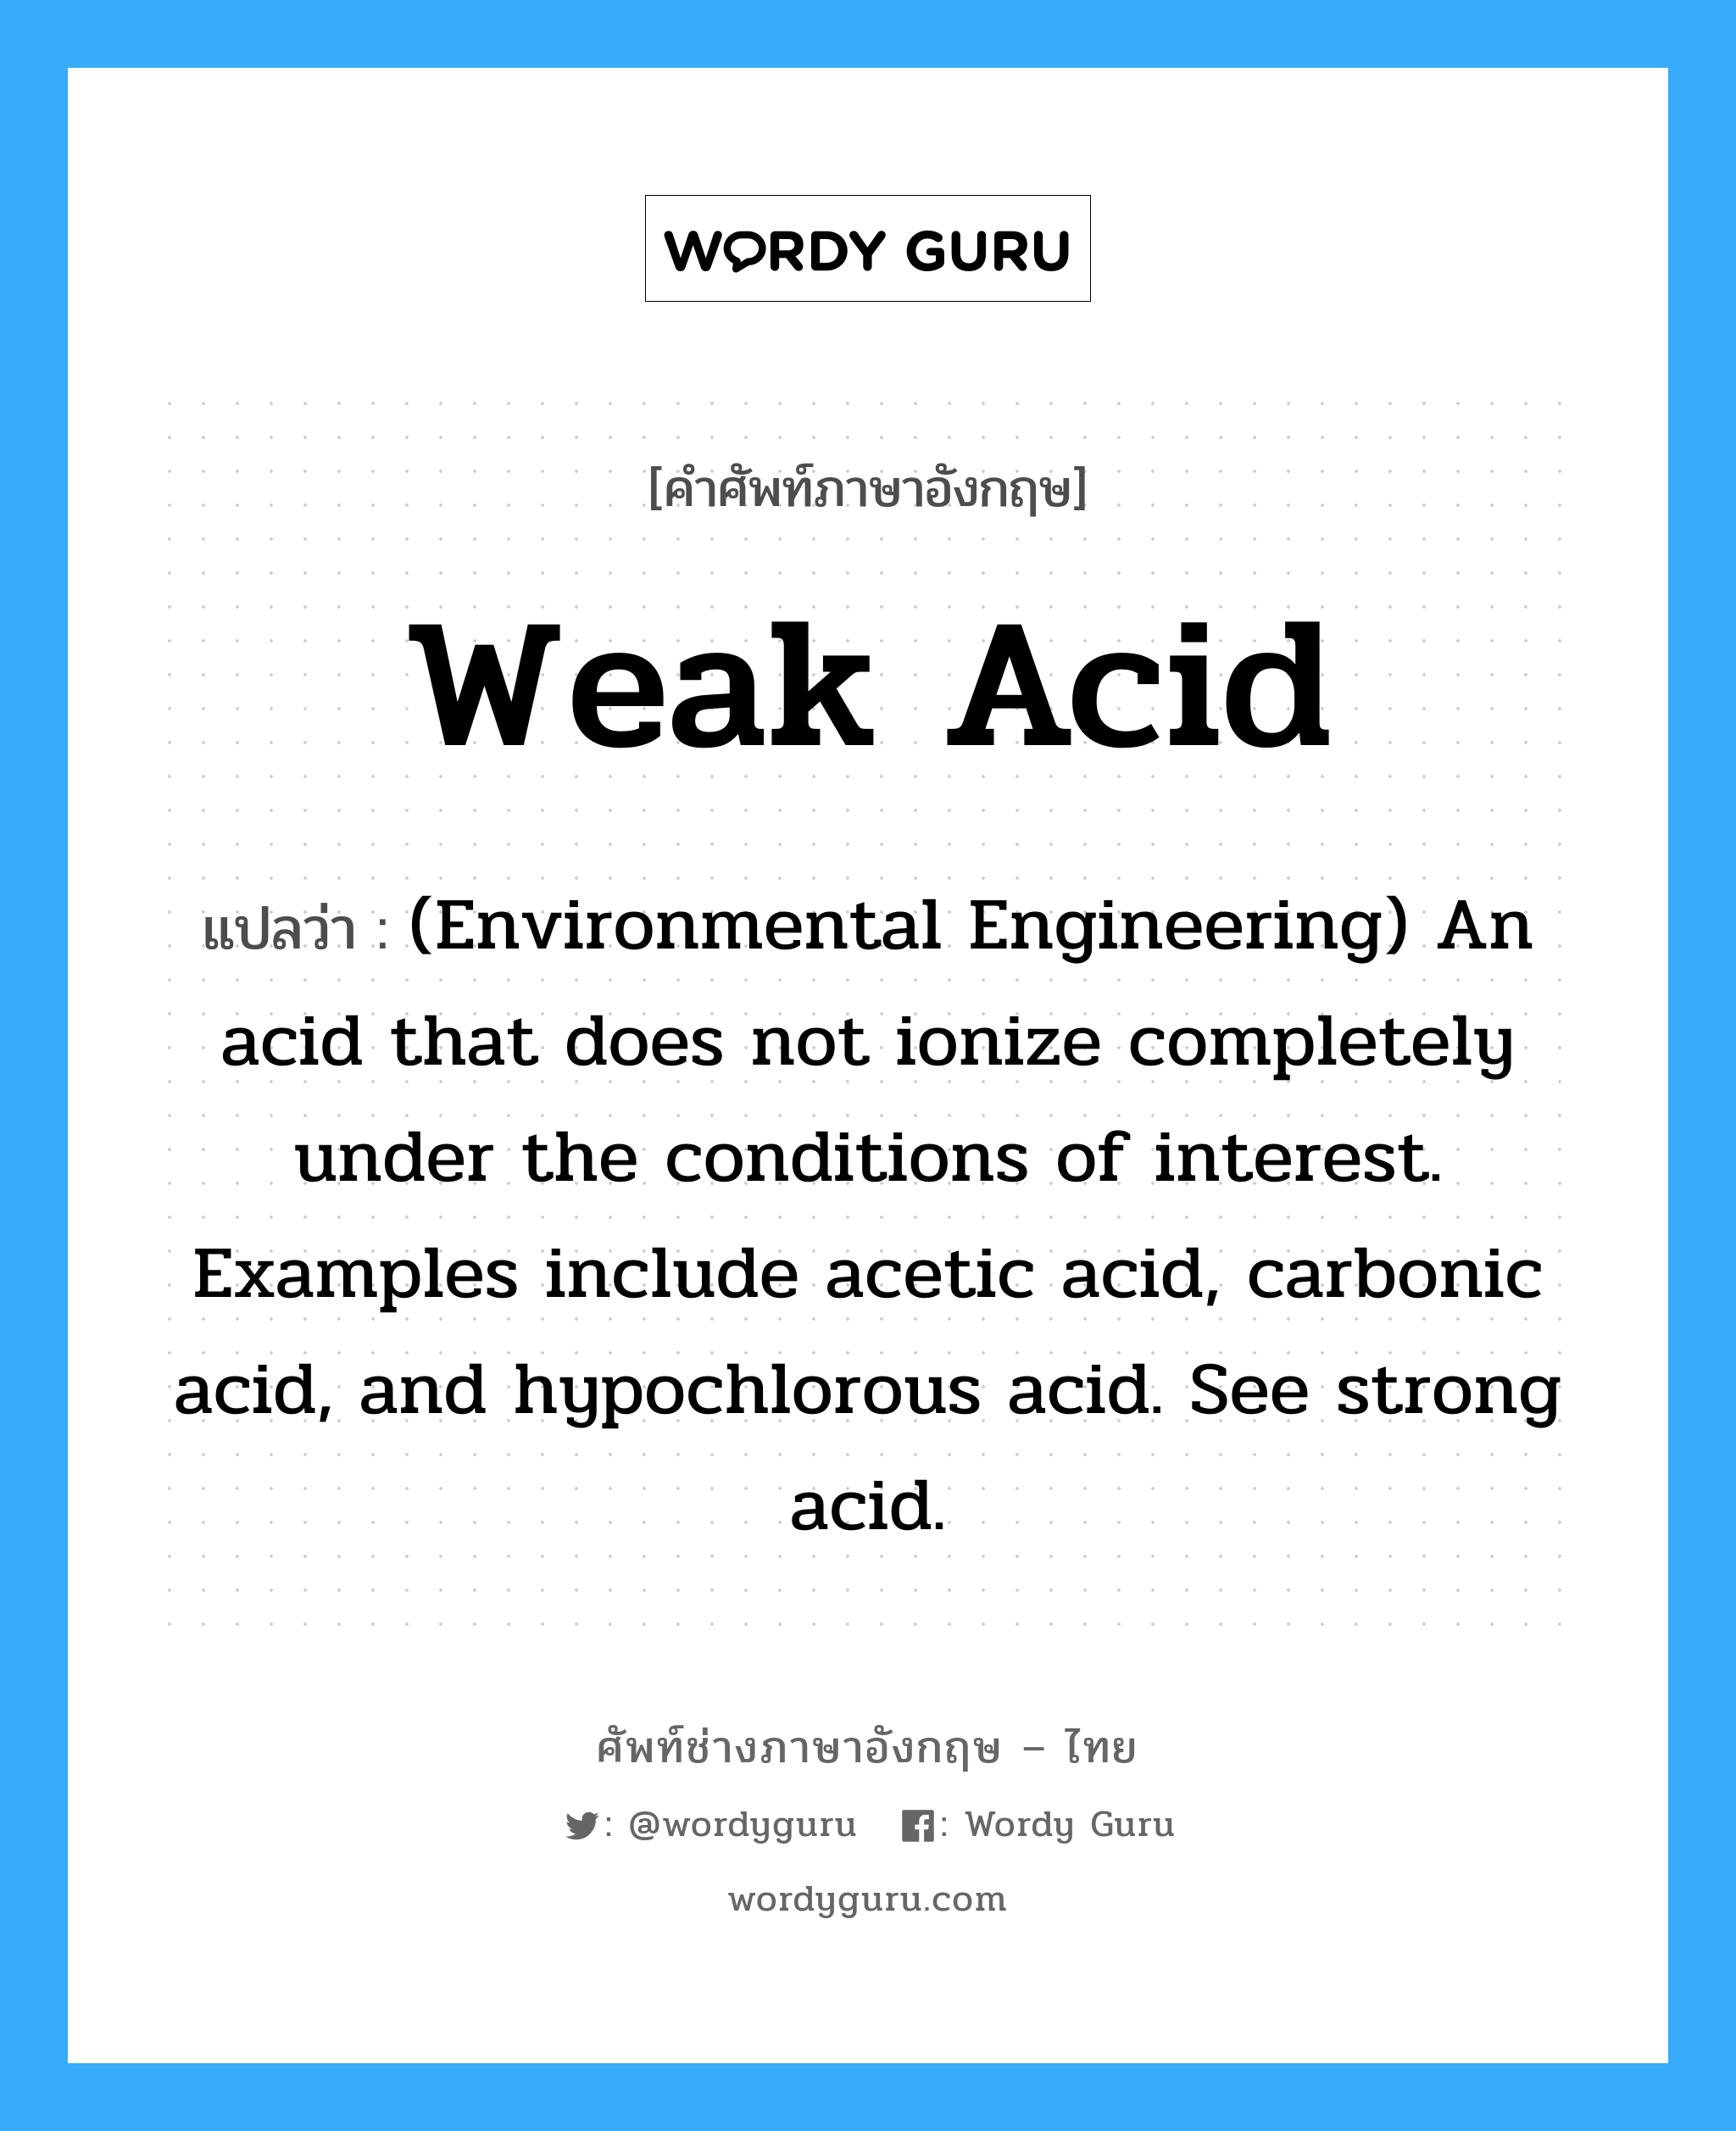 (Environmental Engineering) An acid that does not ionize completely under the conditions of interest. Examples include acetic acid, carbonic acid, and hypochlorous acid. See strong acid. ภาษาอังกฤษ?, คำศัพท์ช่างภาษาอังกฤษ - ไทย (Environmental Engineering) An acid that does not ionize completely under the conditions of interest. Examples include acetic acid, carbonic acid, and hypochlorous acid. See strong acid. คำศัพท์ภาษาอังกฤษ (Environmental Engineering) An acid that does not ionize completely under the conditions of interest. Examples include acetic acid, carbonic acid, and hypochlorous acid. See strong acid. แปลว่า Weak acid